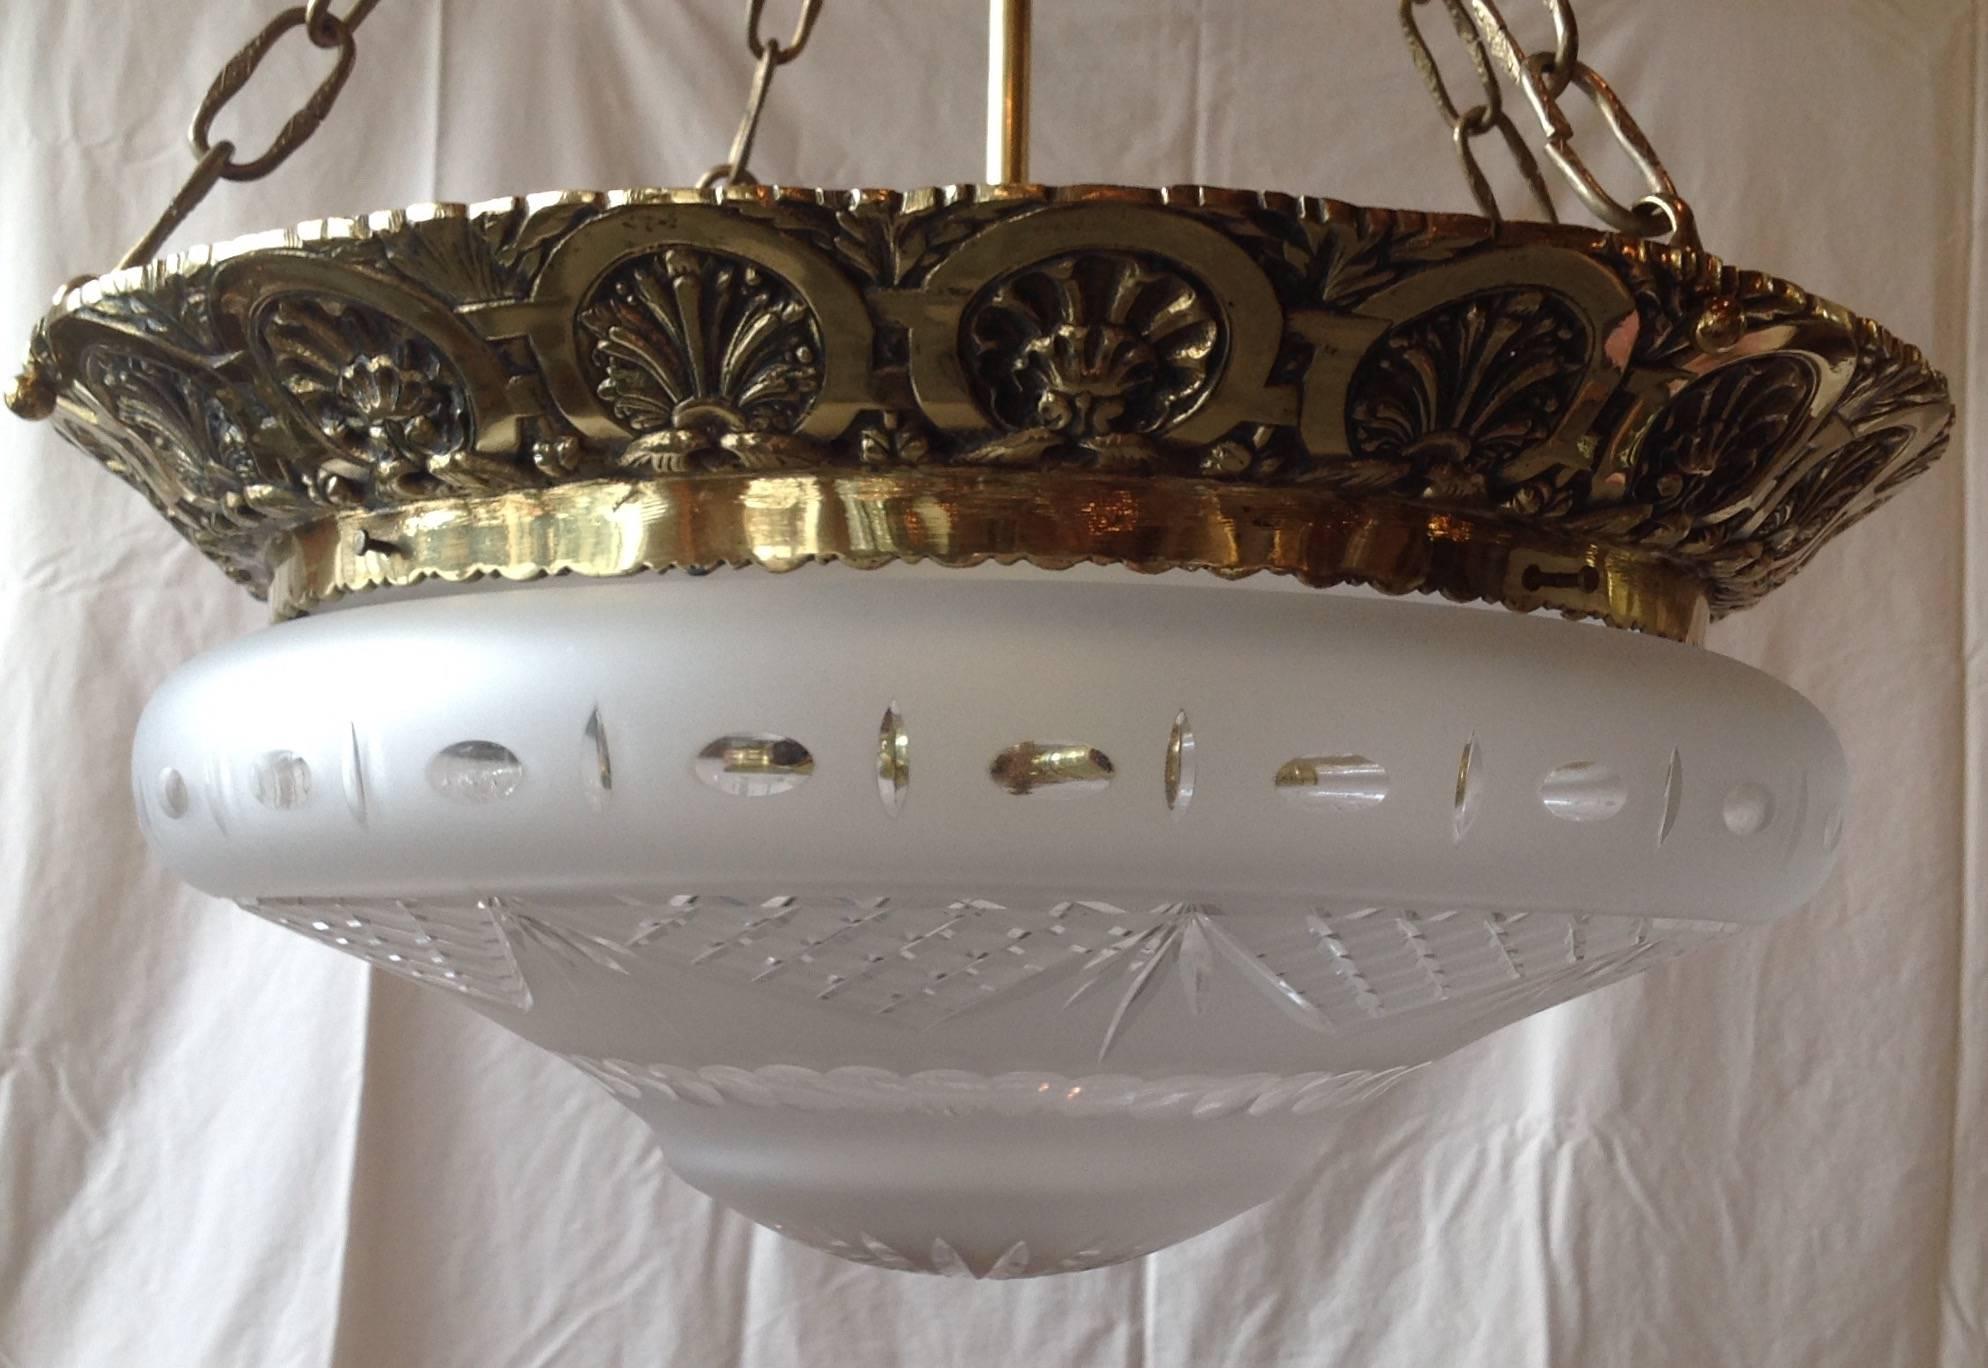 Pair of American 1920s, cast brass and cut crystal, glass frosted bowl/globe bottom. Measure 24 inches high and 21 inches in diameter. 16" shade fitter. These can be adjusted to ceiling heights, hang from chain and canopy. Good for a foyer